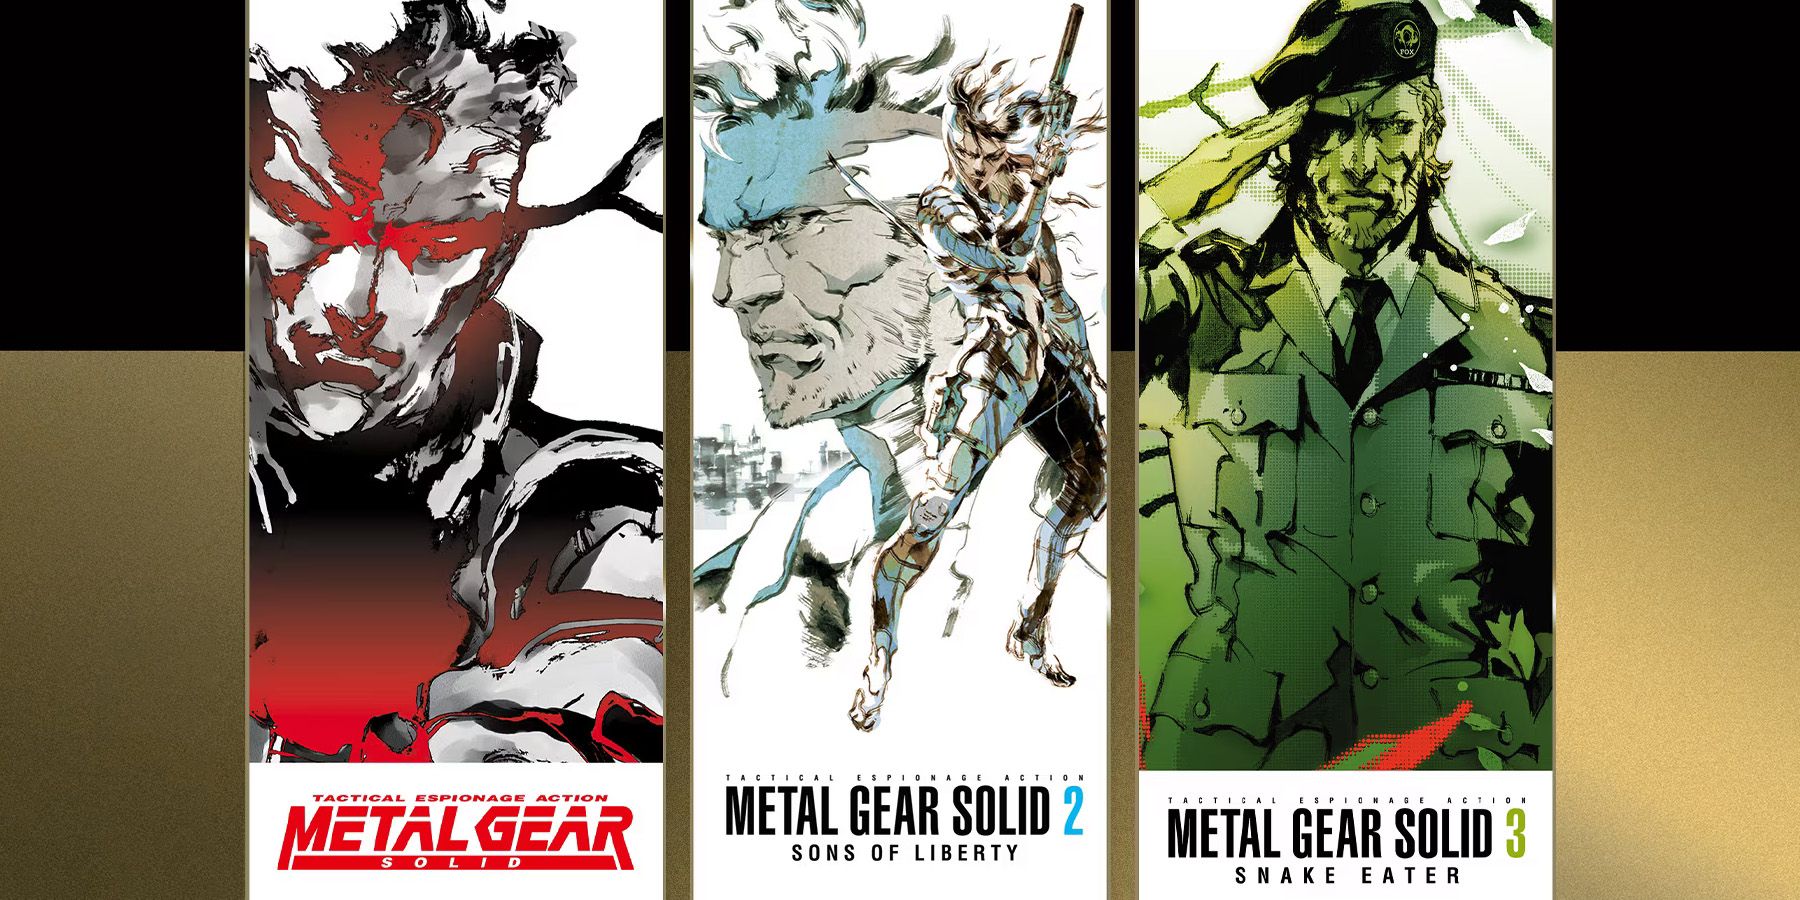 METAL GEAR SOLID: MASTER COLLECTION Vol. 1 will launch on October